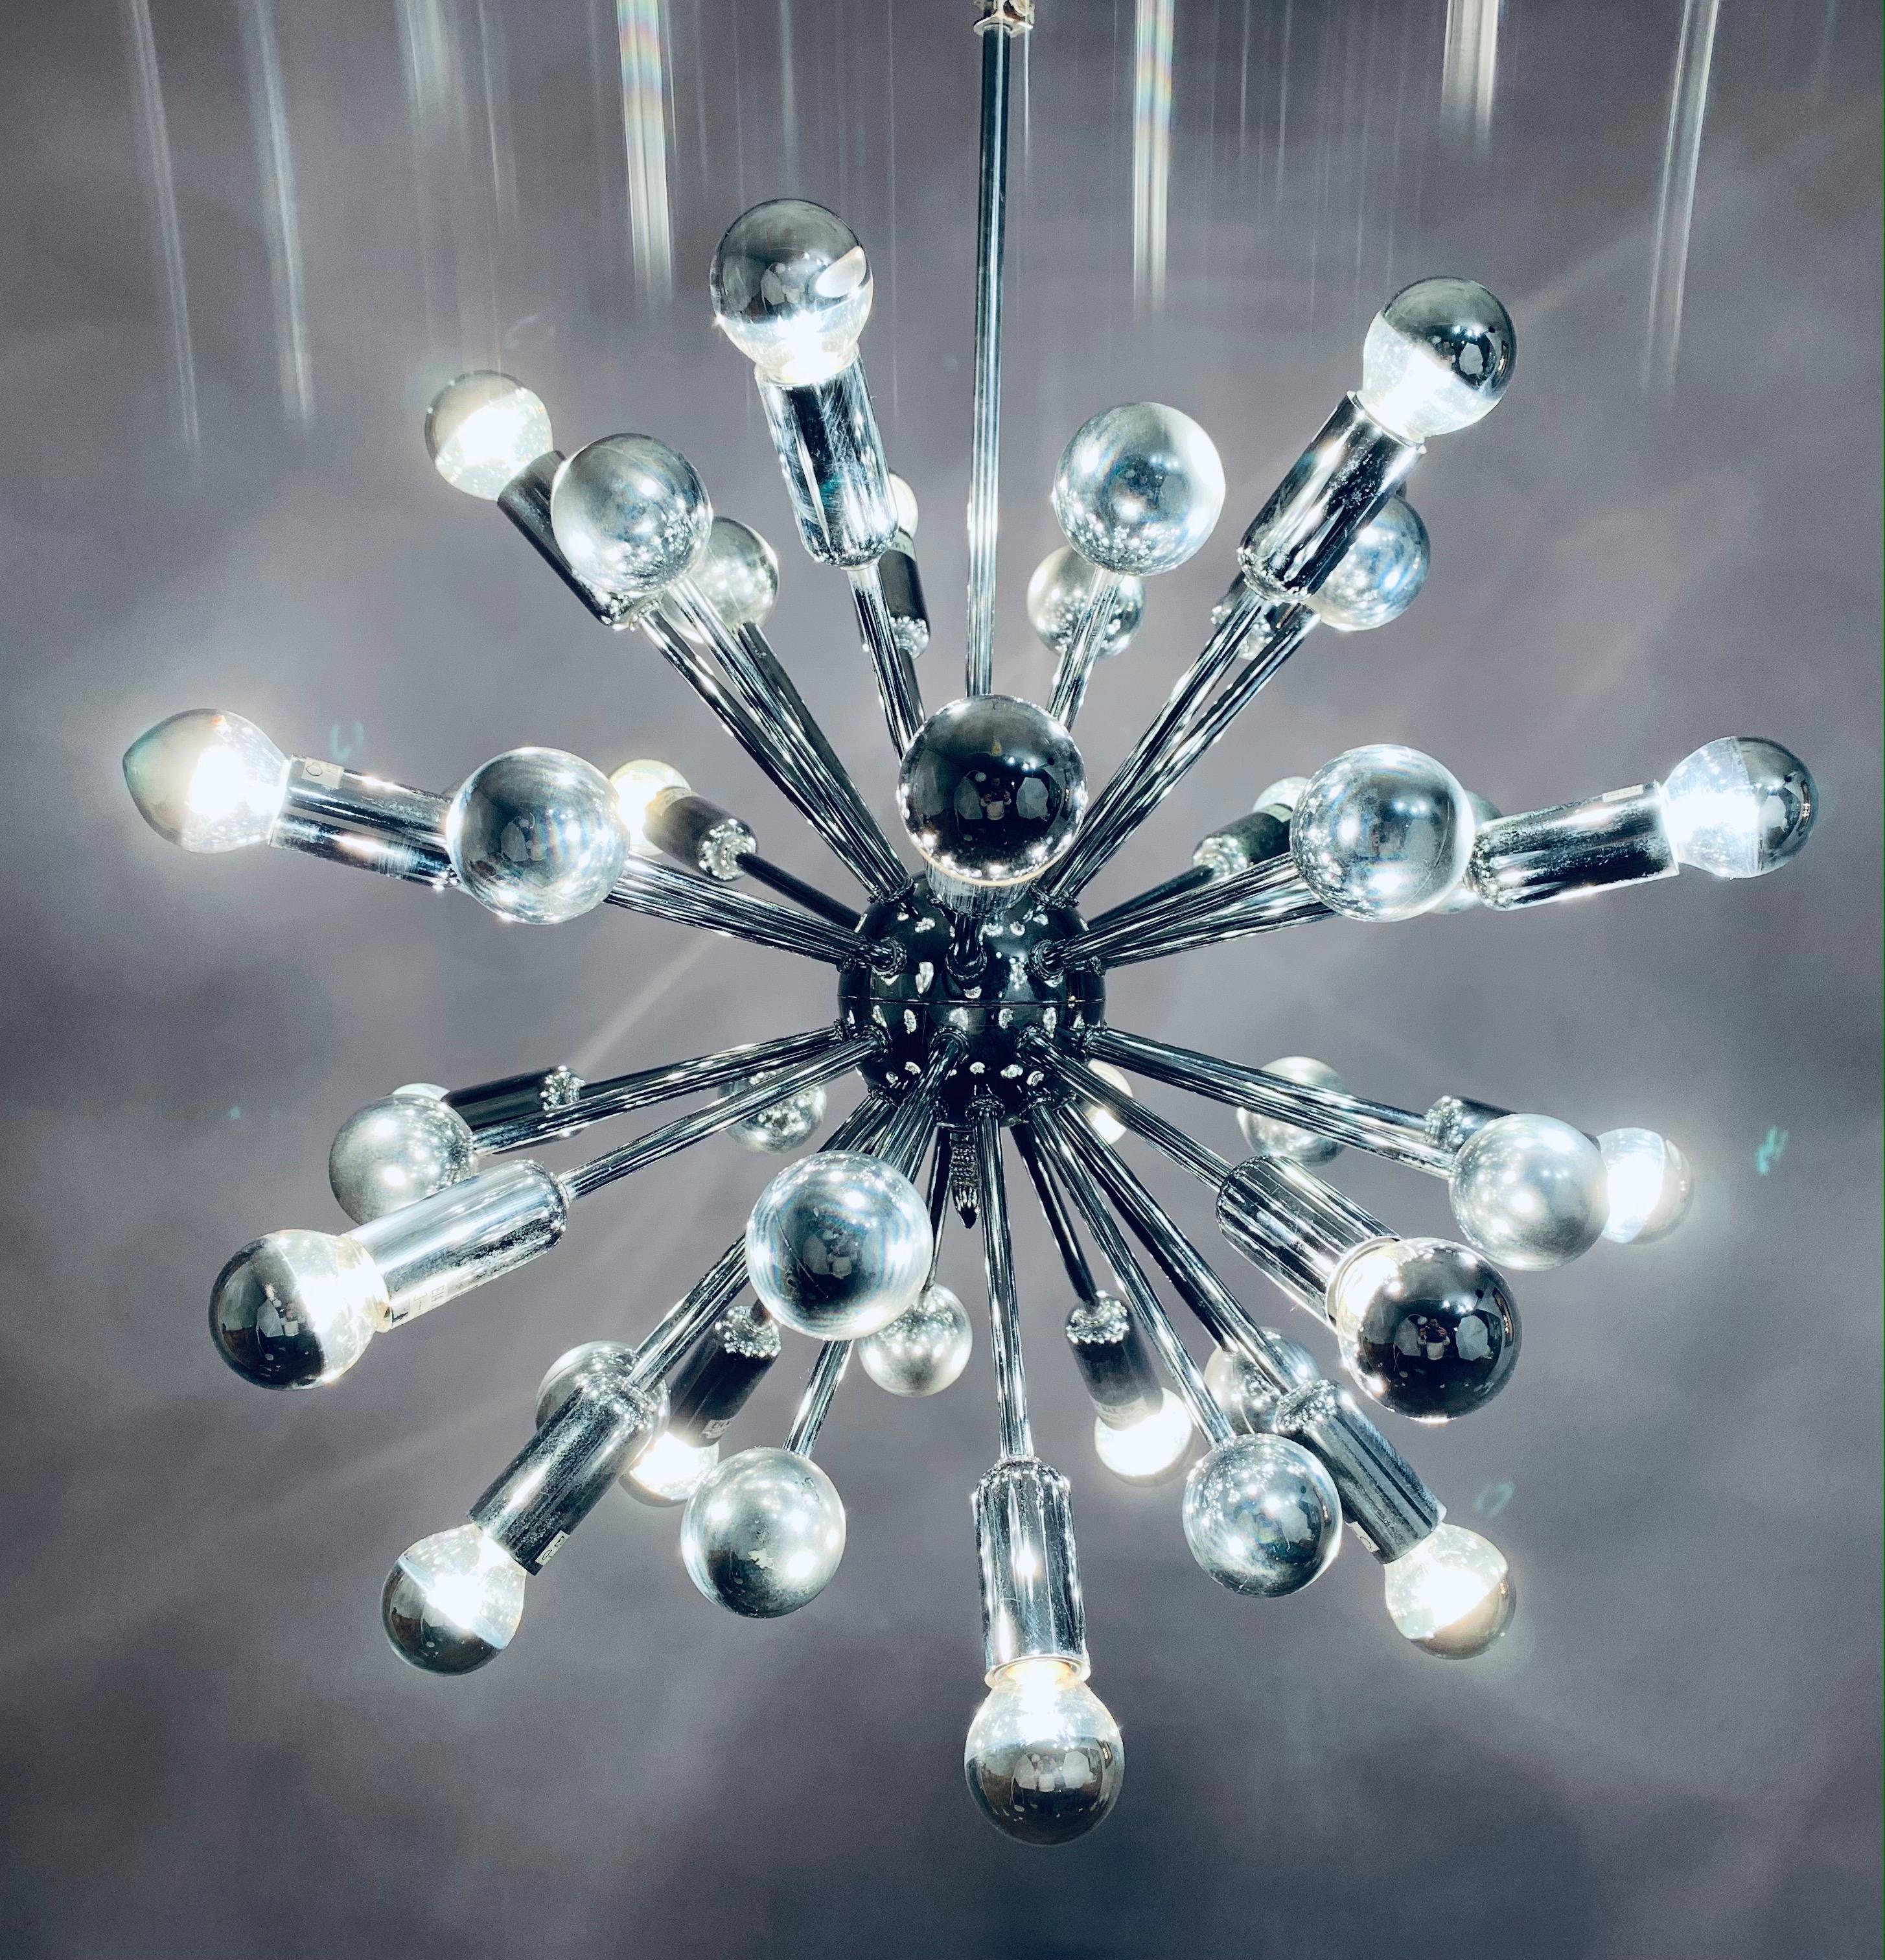 An absolutely stunning chromed-metal sputnik pendant hanging light attributed to Cosack Leuchten. No manufacturers label is present but the bulb holders are the same on others I have researched. Designed in Germany by Cosack during the 1970s. 20